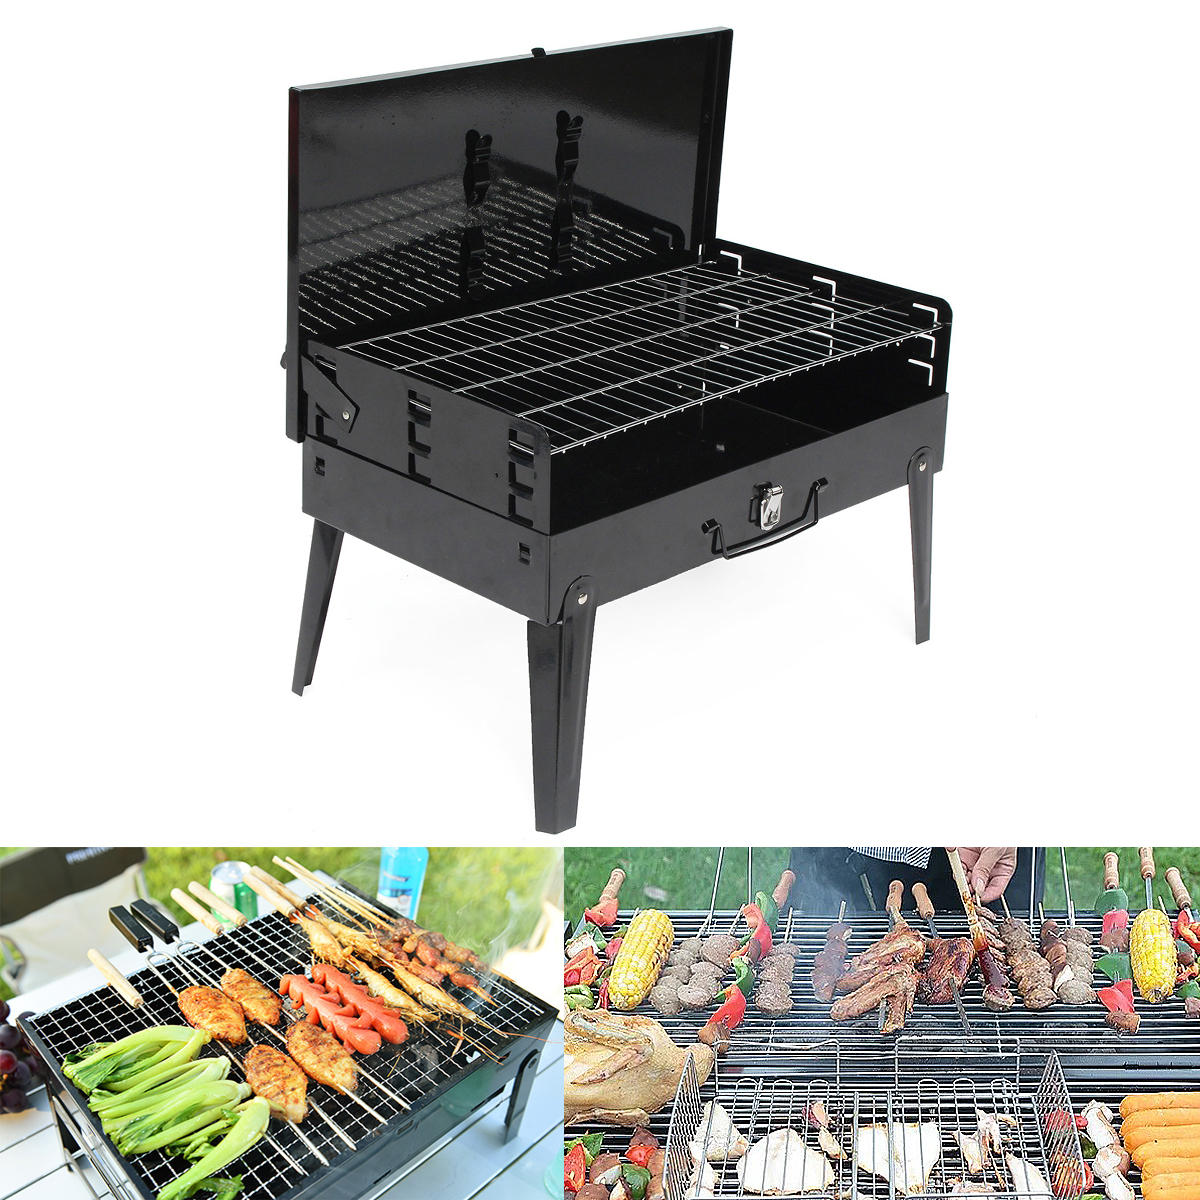 43x26.5x21cm Outdoor Folding Garden Charcoal Barbeque Patio Portable Large Cooking Grill